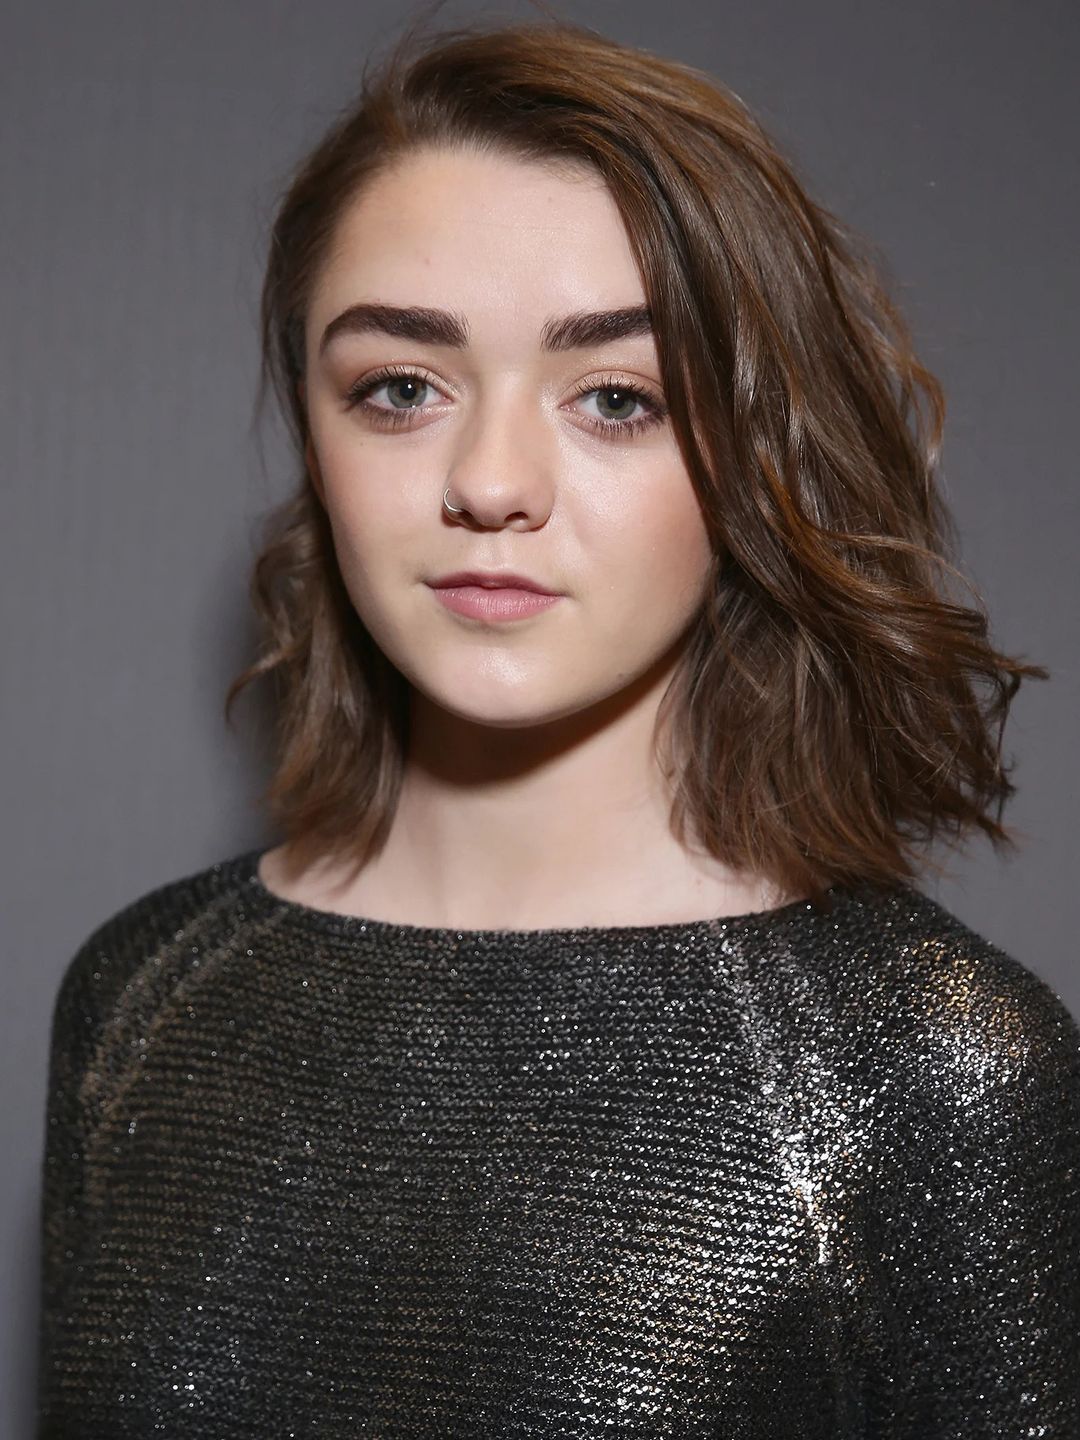 Maisie Williams appearance